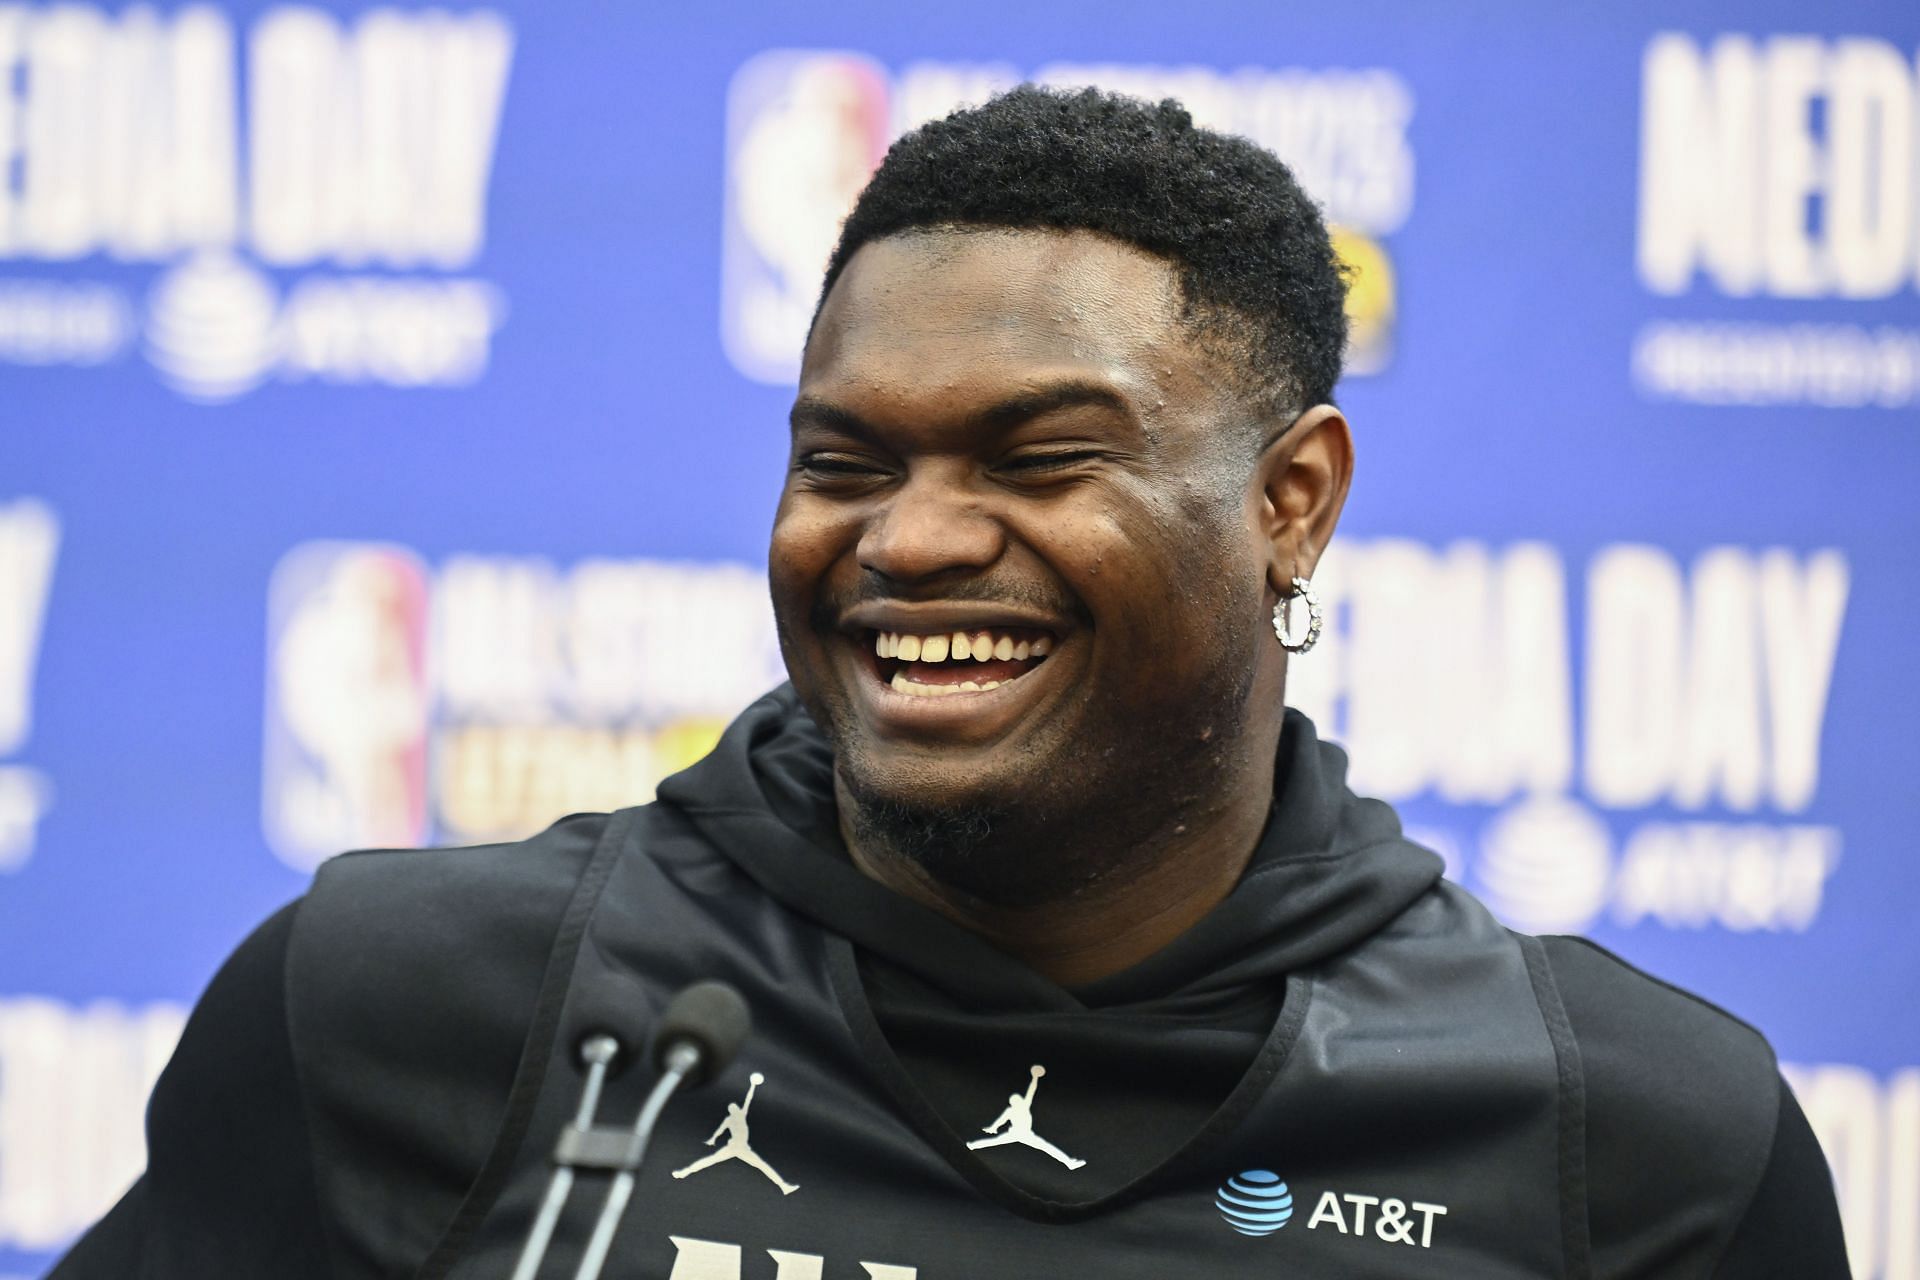 Zion Williamson at the 2023 NBA All Star - Practice & Media Availability